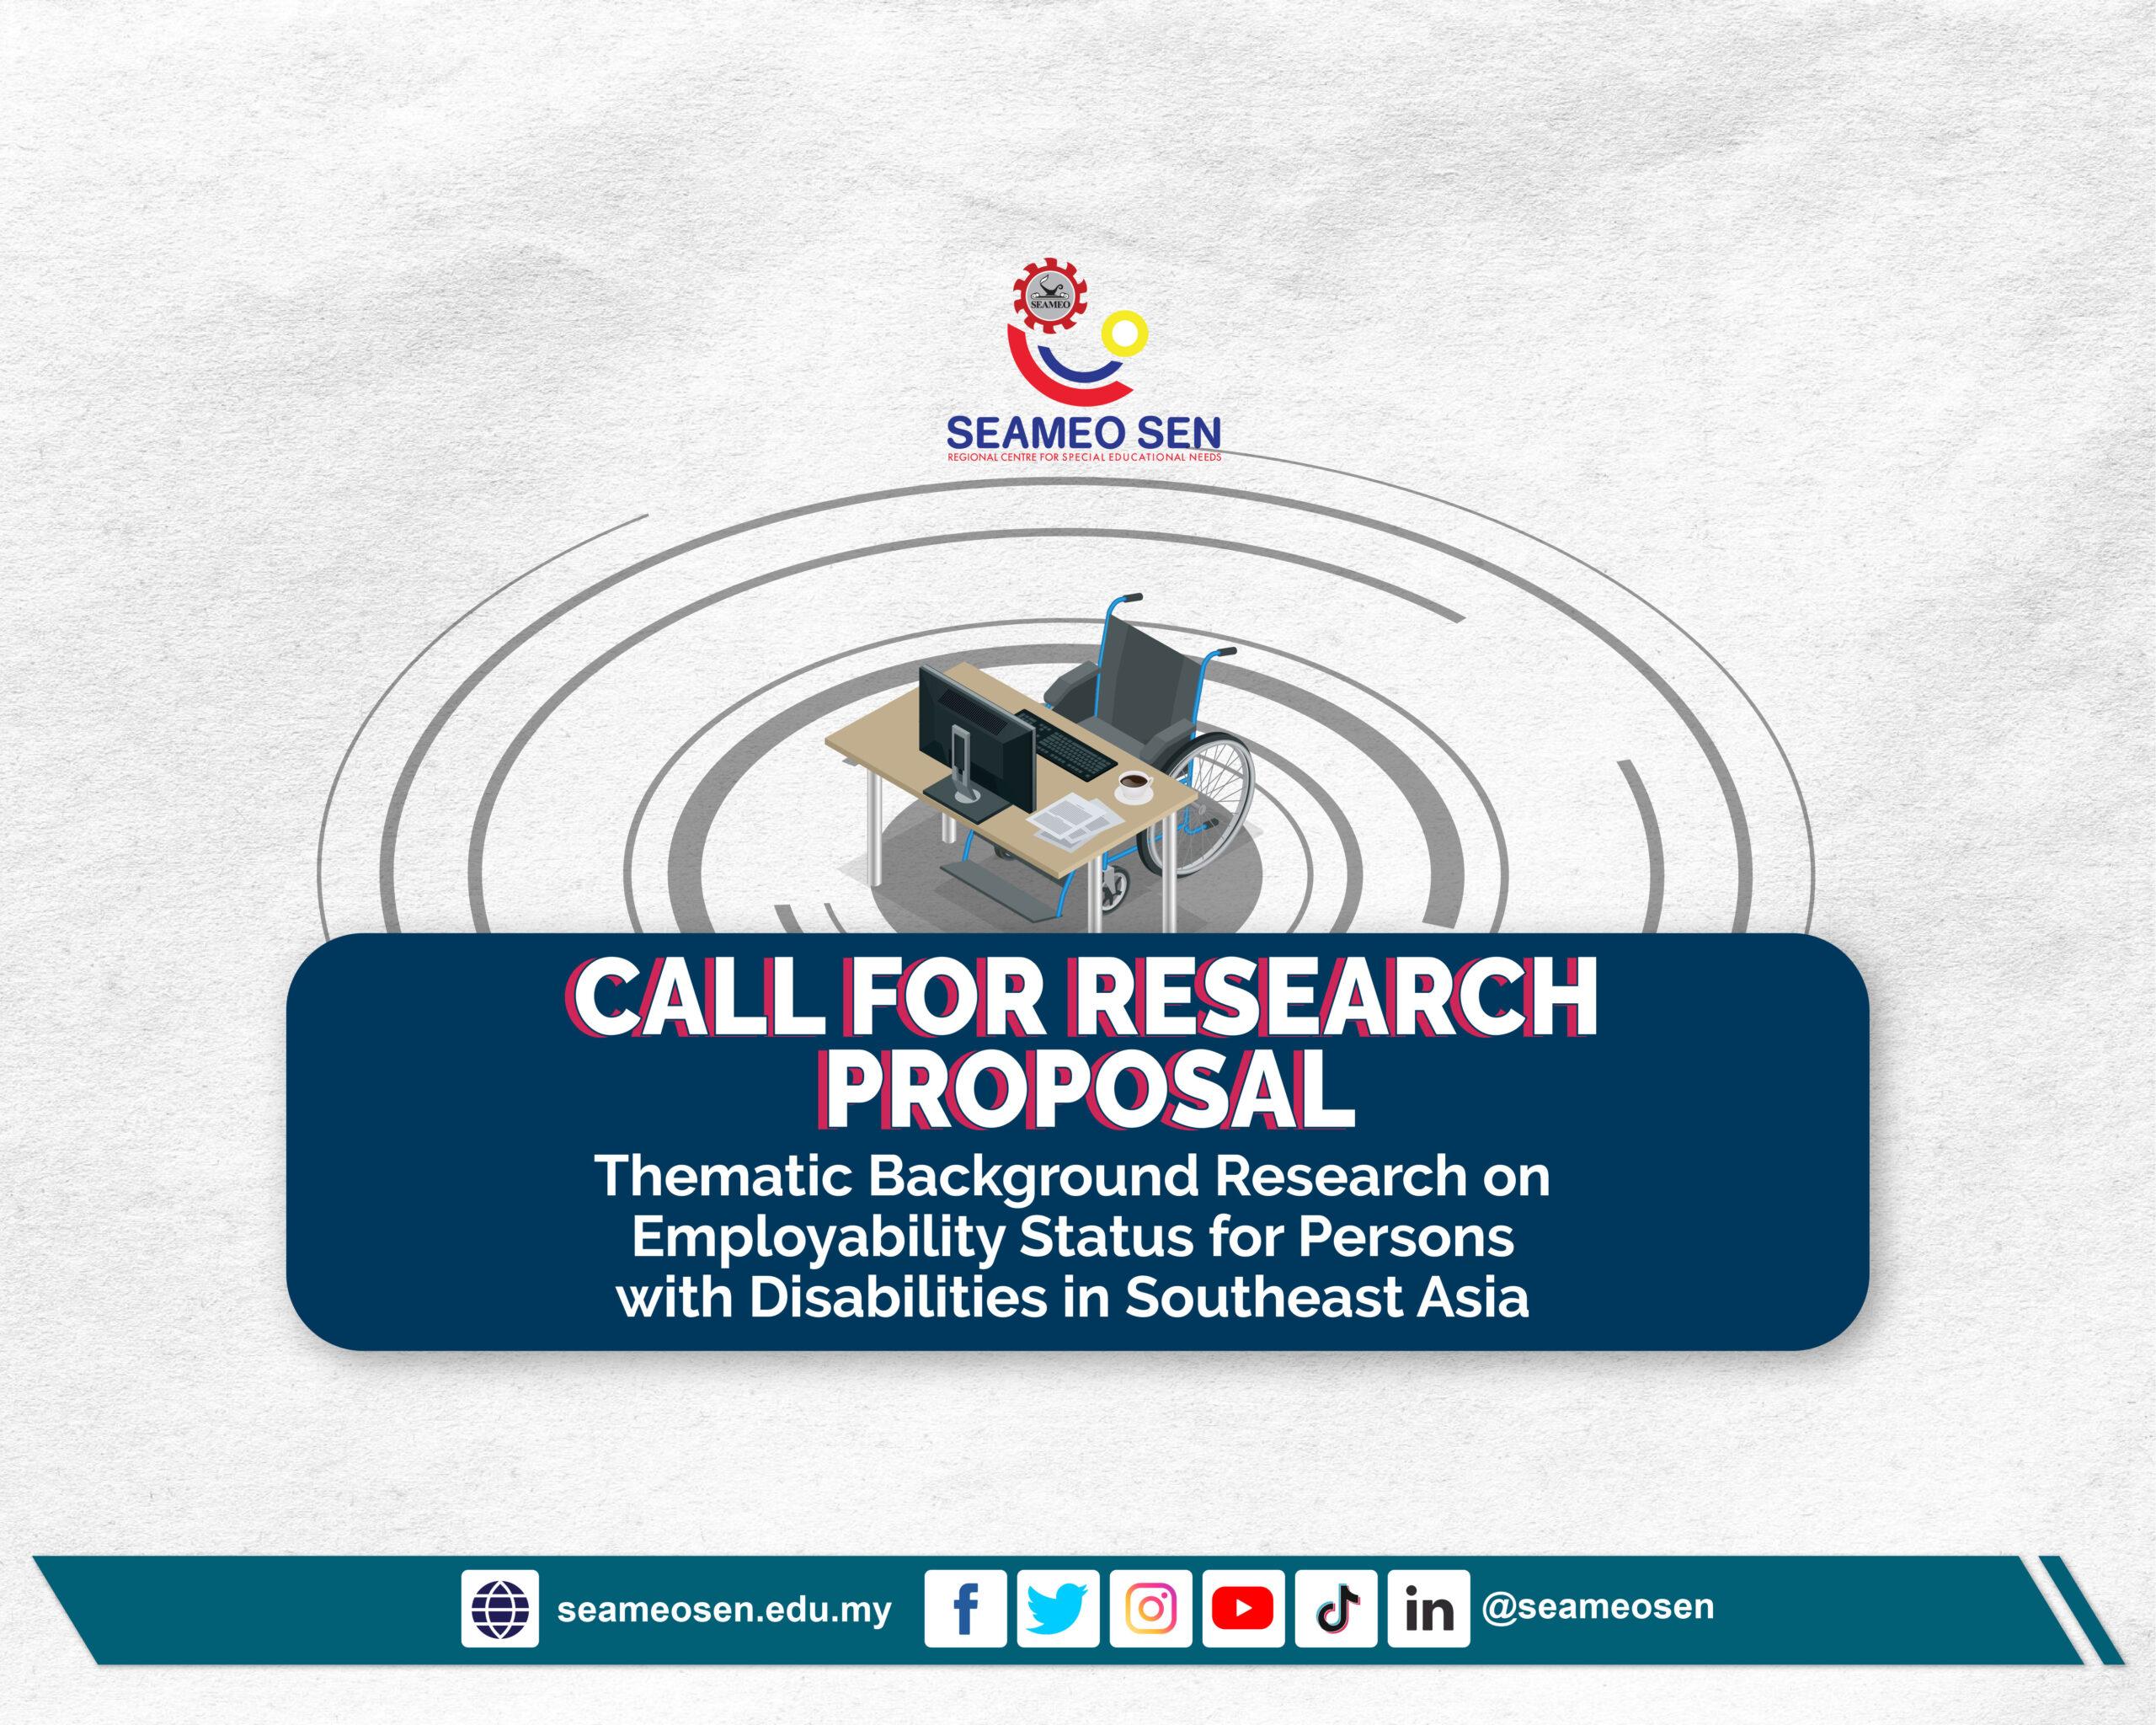 CALL FOR RESEARCH PROPOSAL: Thematic Background Research on Employability Status for Persons with Disabilities in Southeast Asia